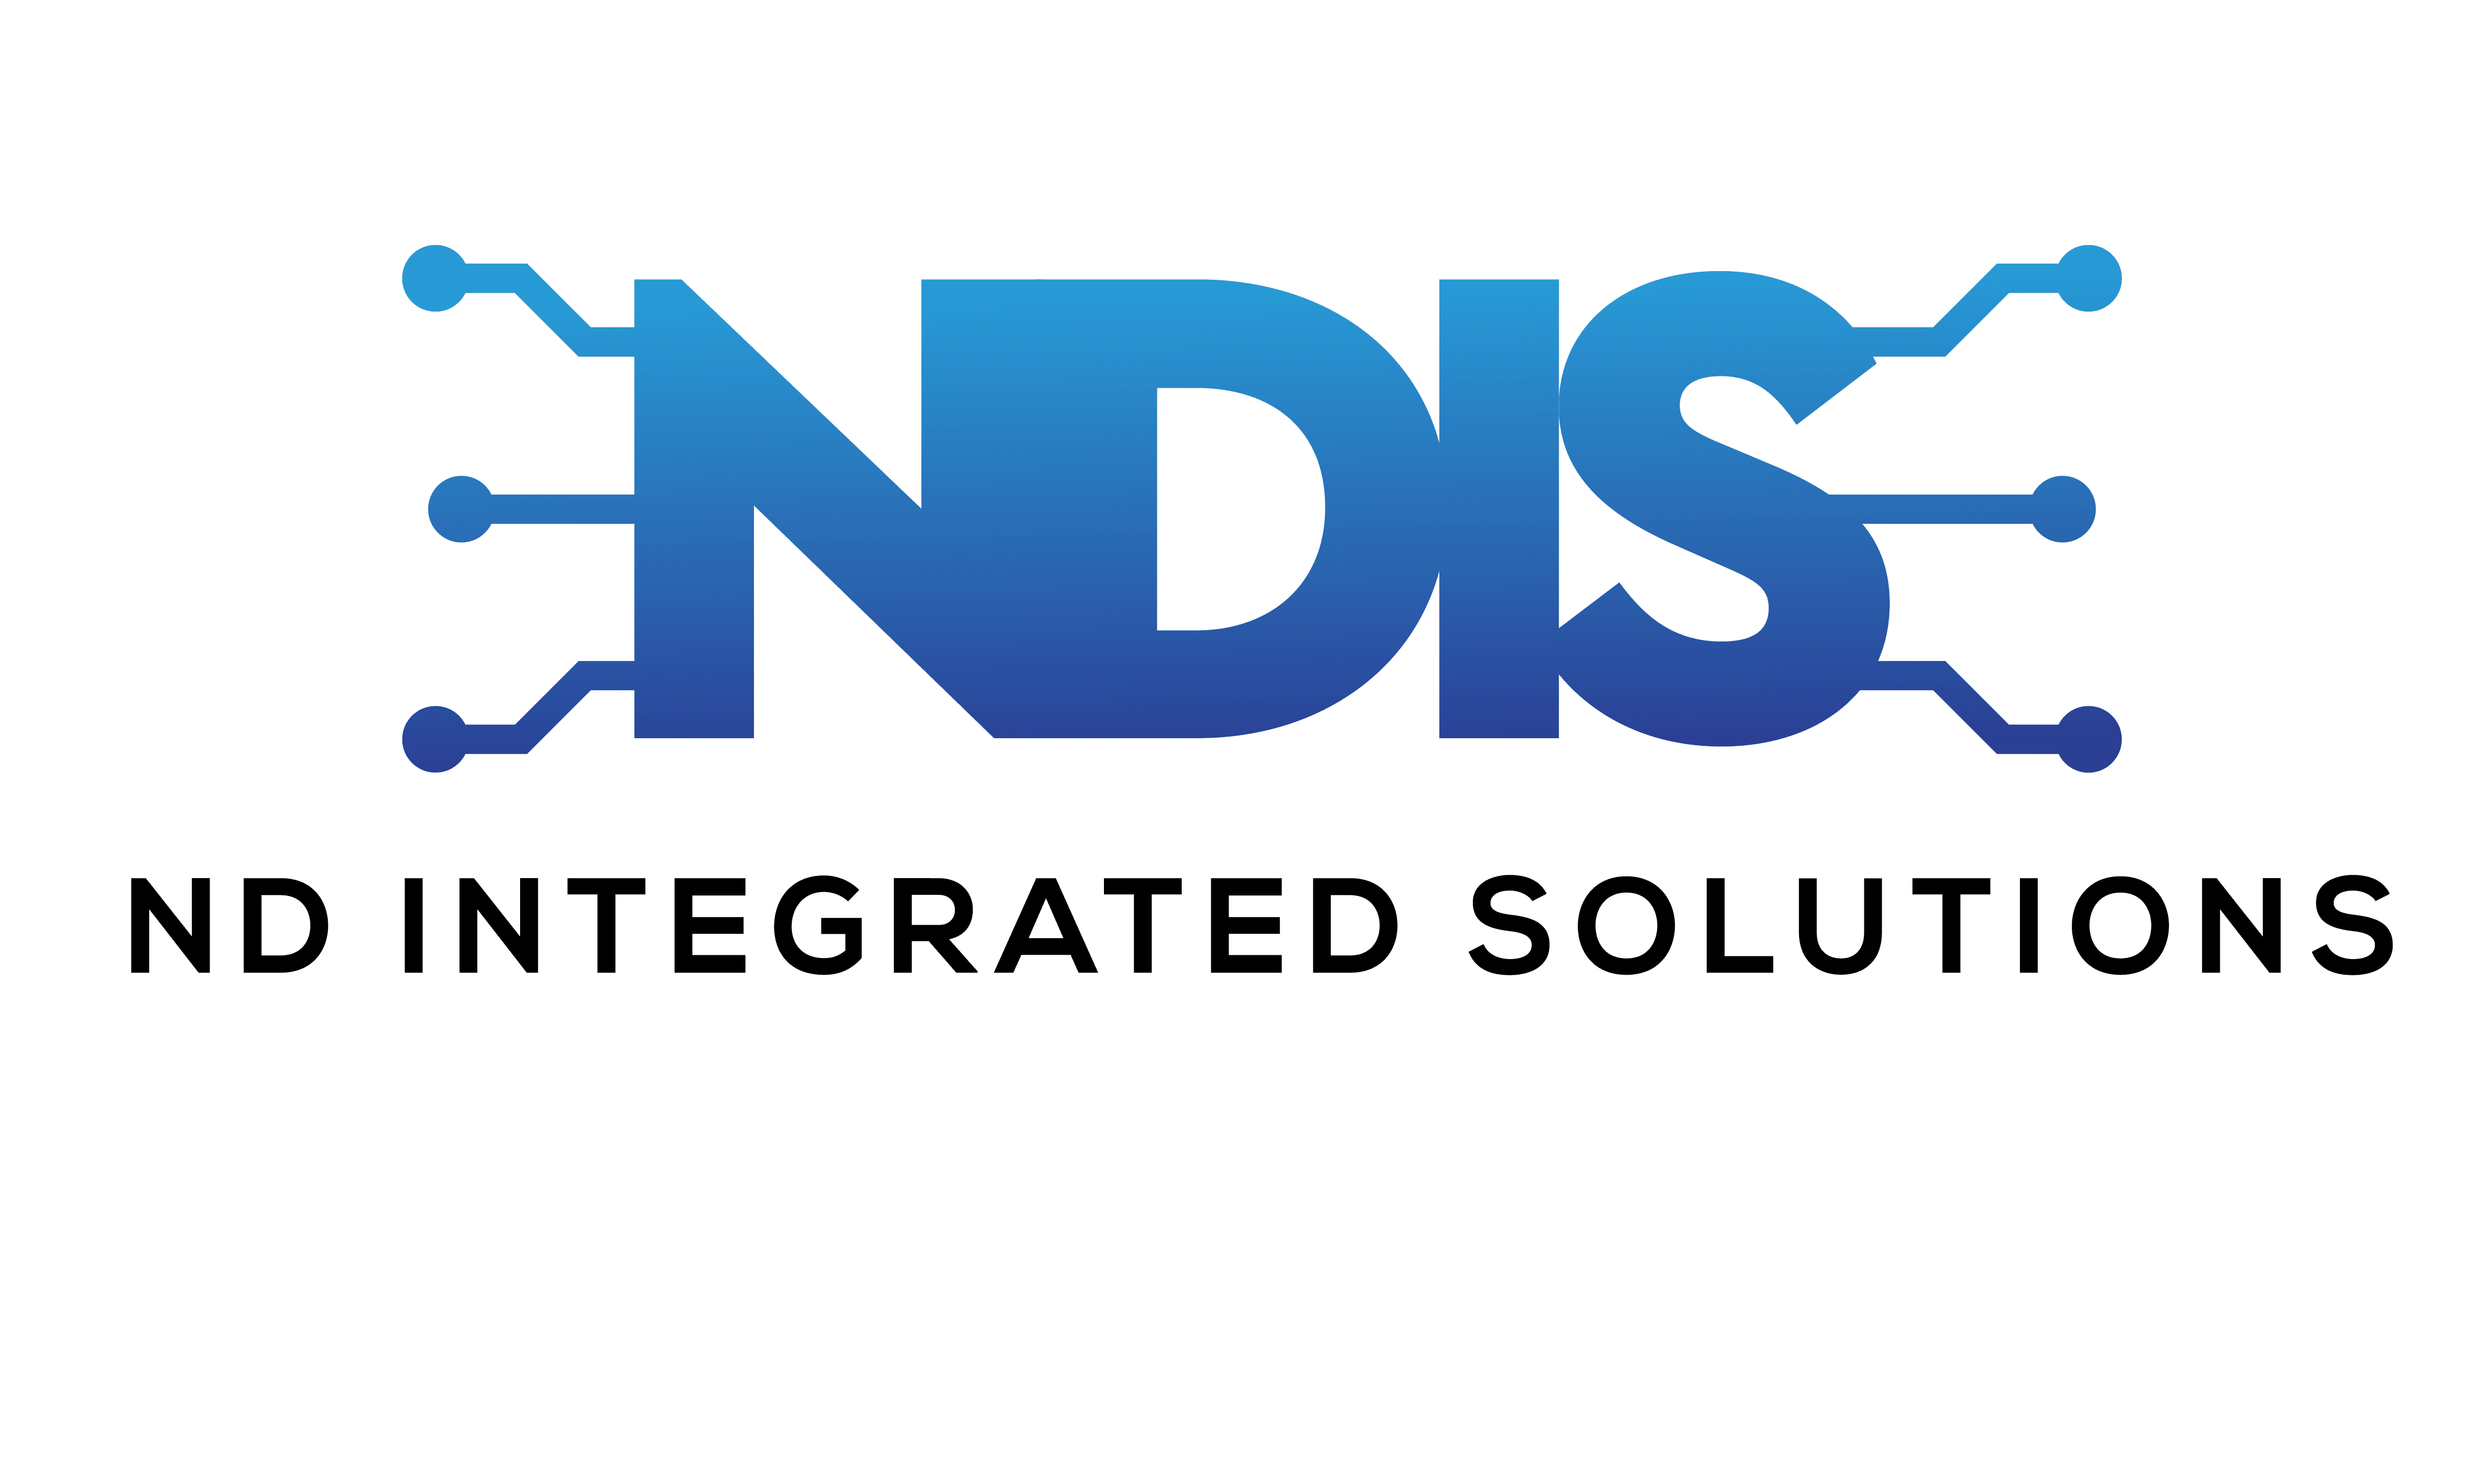 ND Integrated Solutions Inc